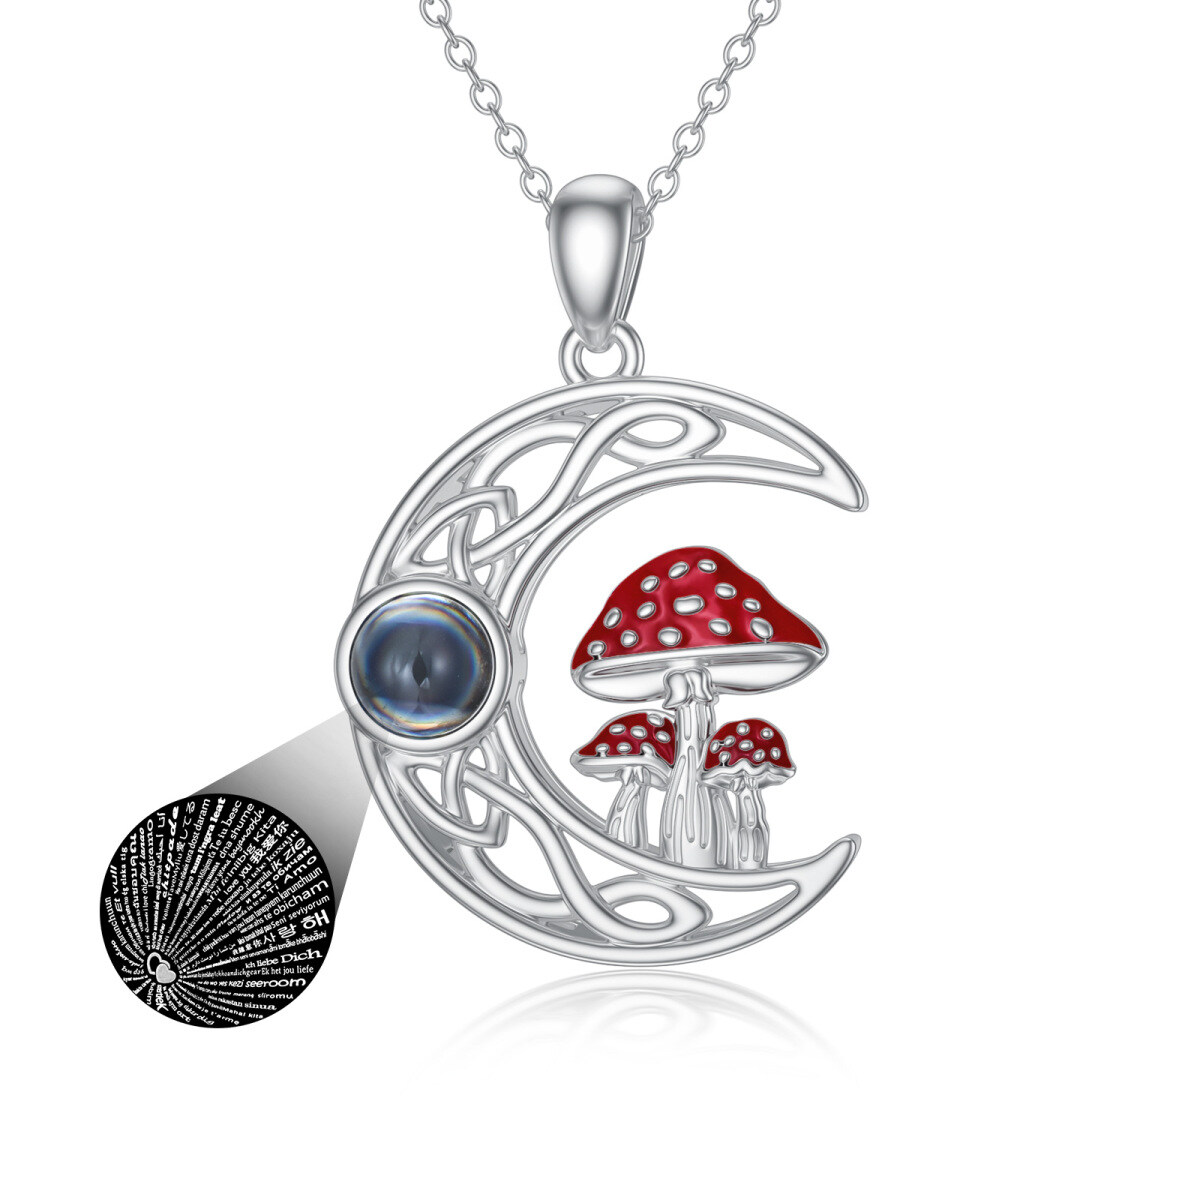 Sterling Silver Circular Shaped Projection Stone Mushroom & Celtic Knot & Moon Pendant Necklace with Engraved Word-1